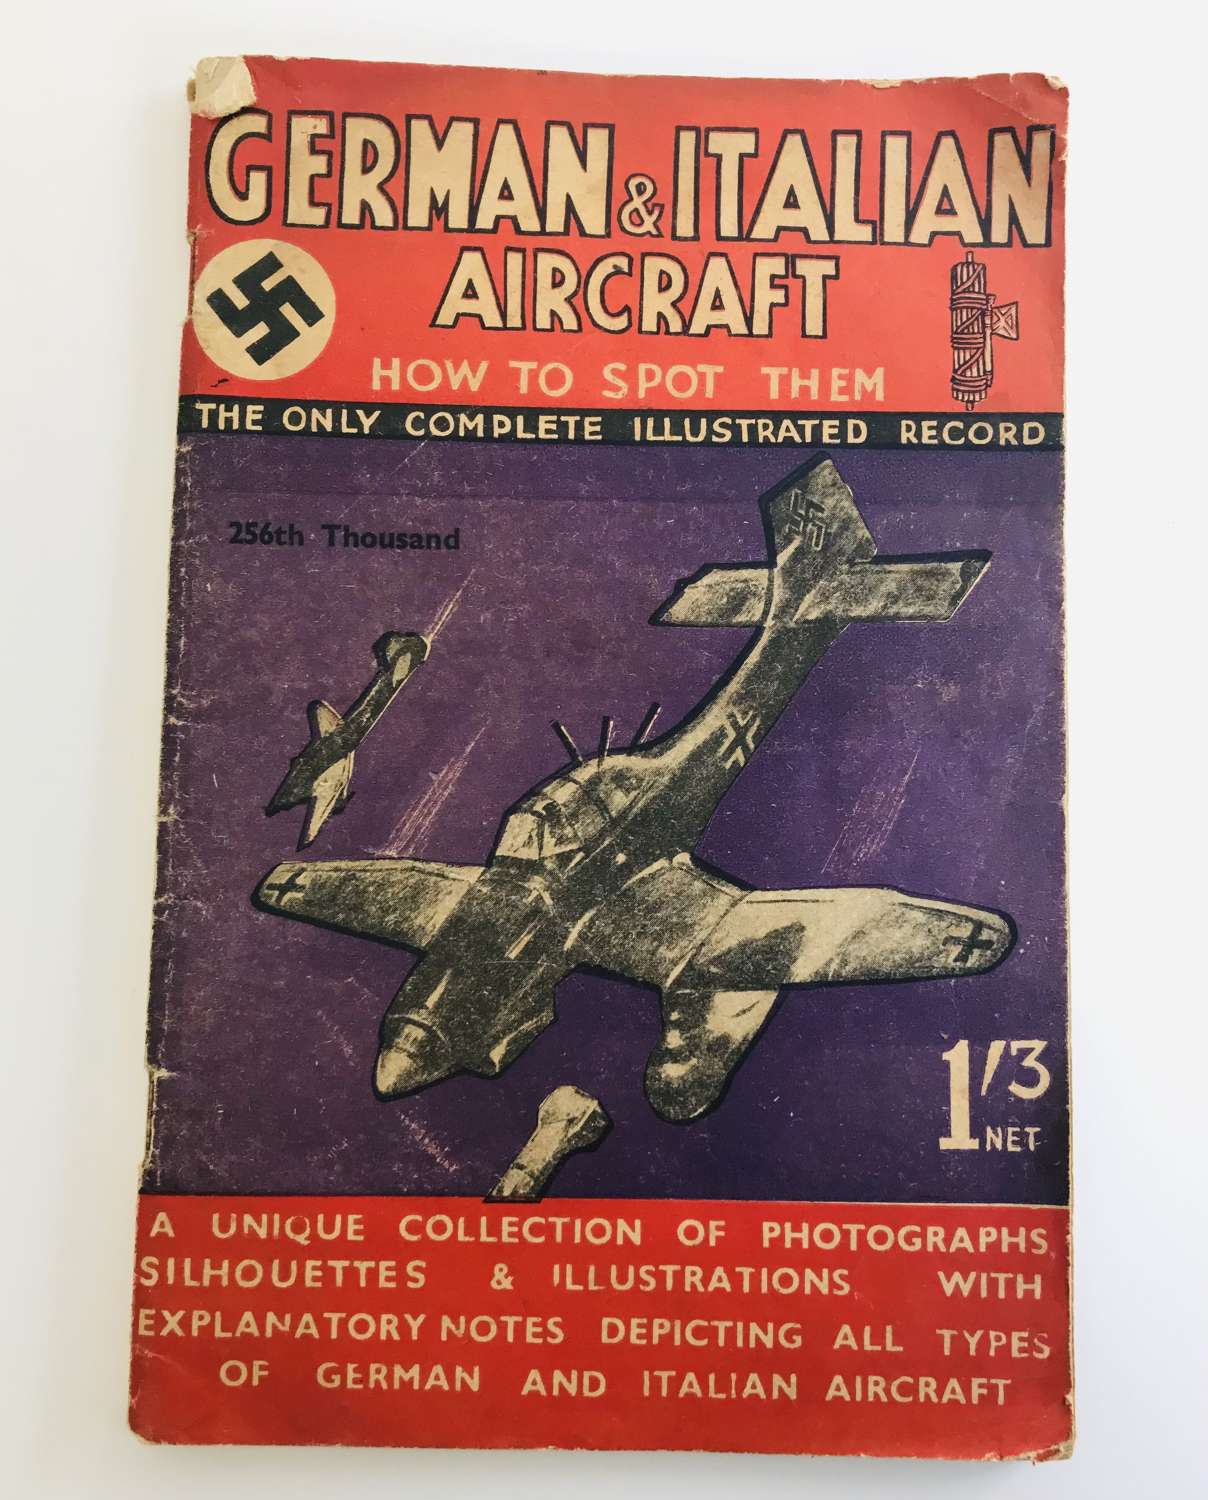 German and Italian aircraft identification book dating from 1940